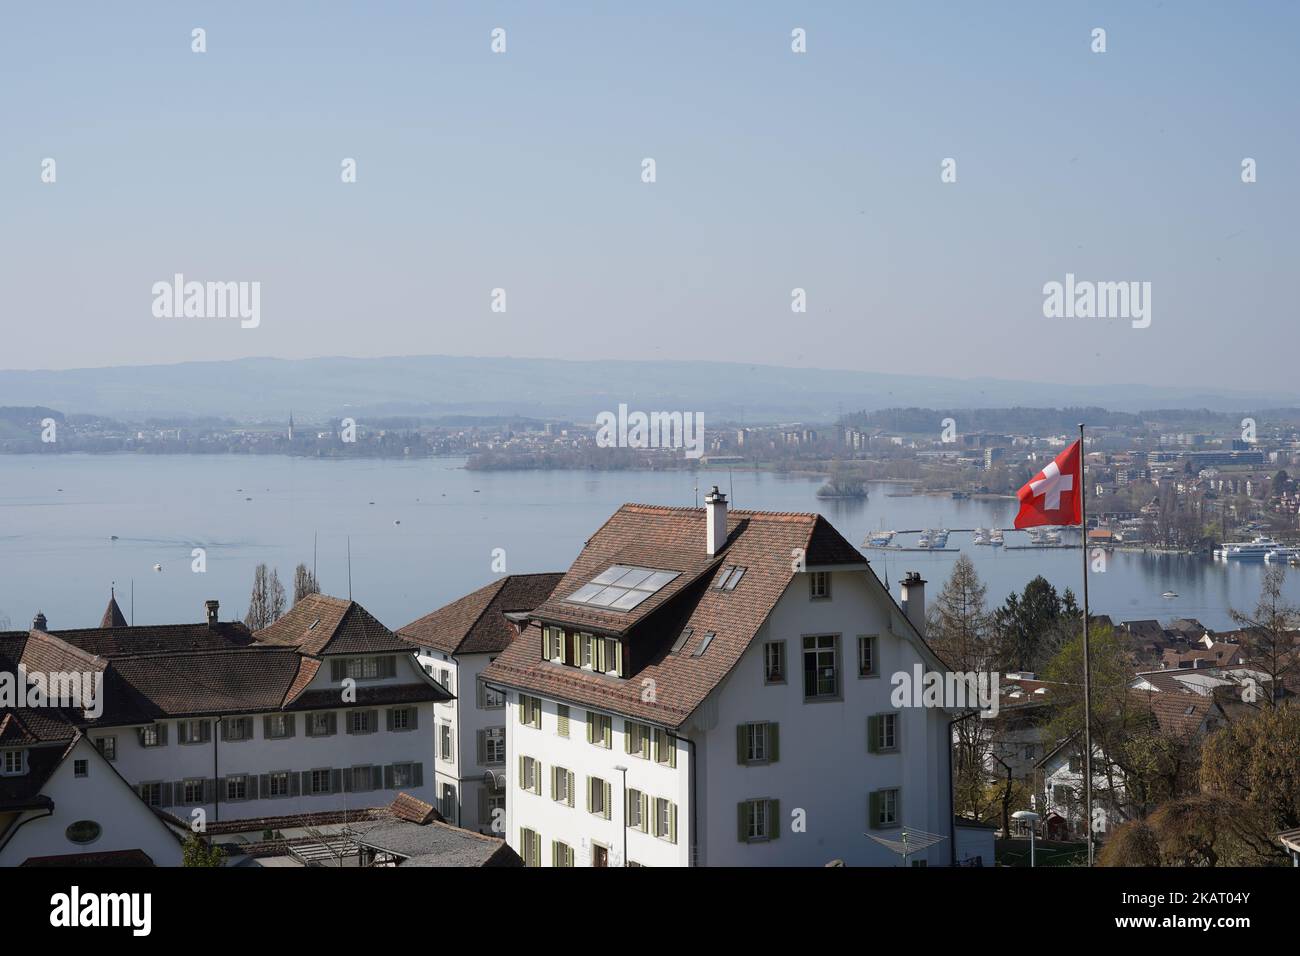 Panorama of Zug, Switzerland, from hill over the town. Stock Photo